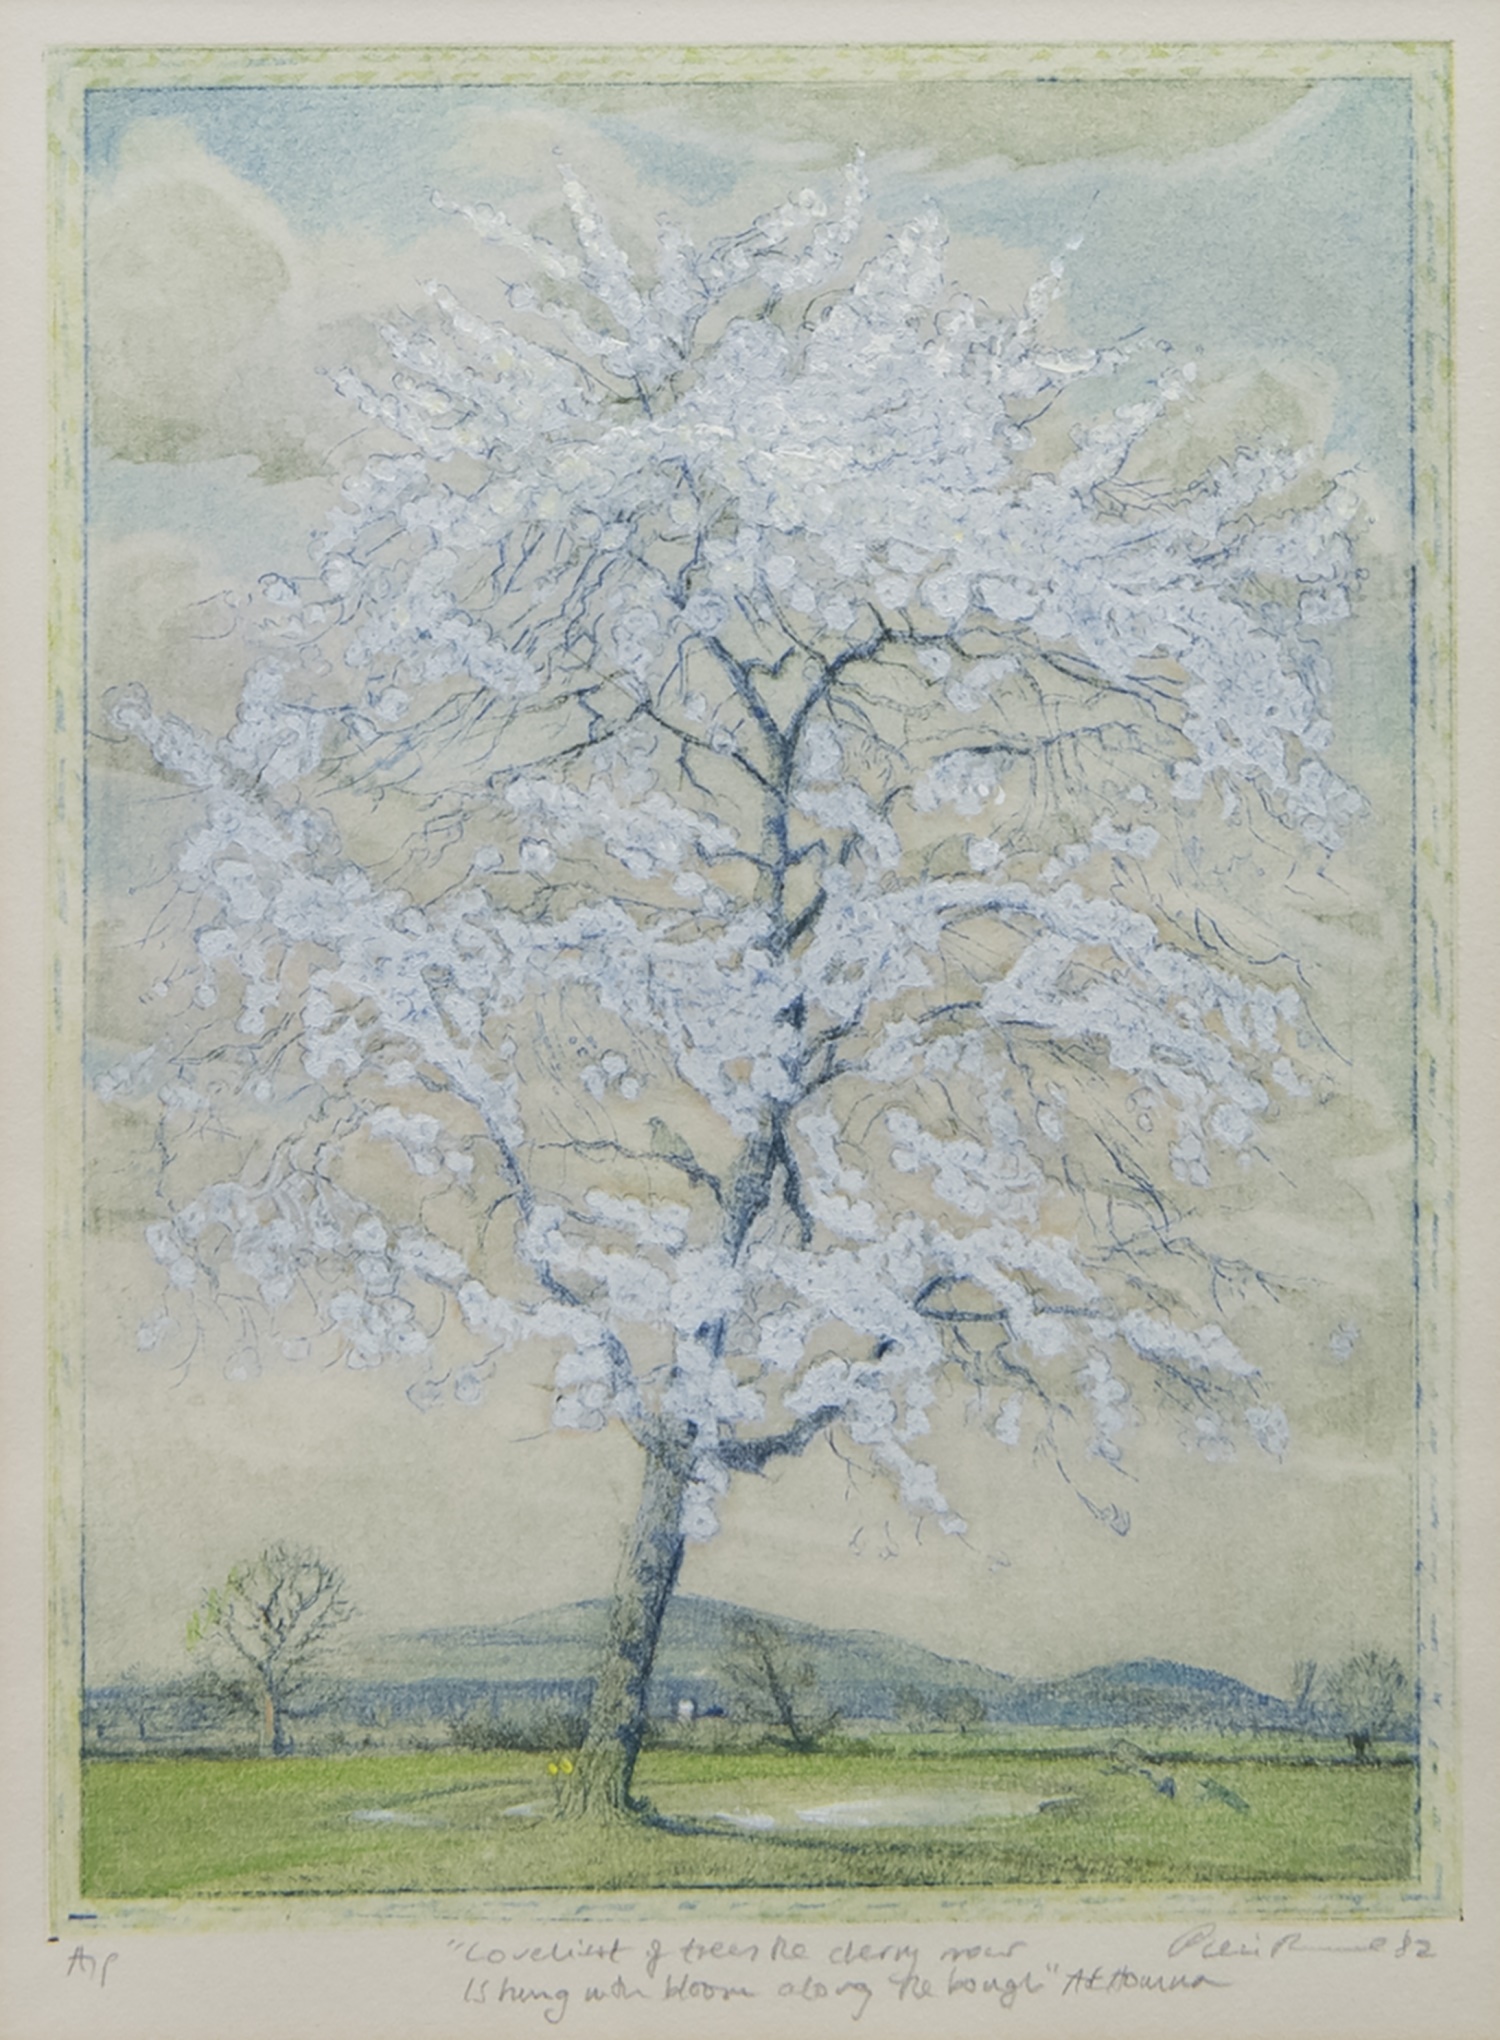 CHERRY BLOSSOMS, AN ARTISTS PROOF PRINT - Image 2 of 2